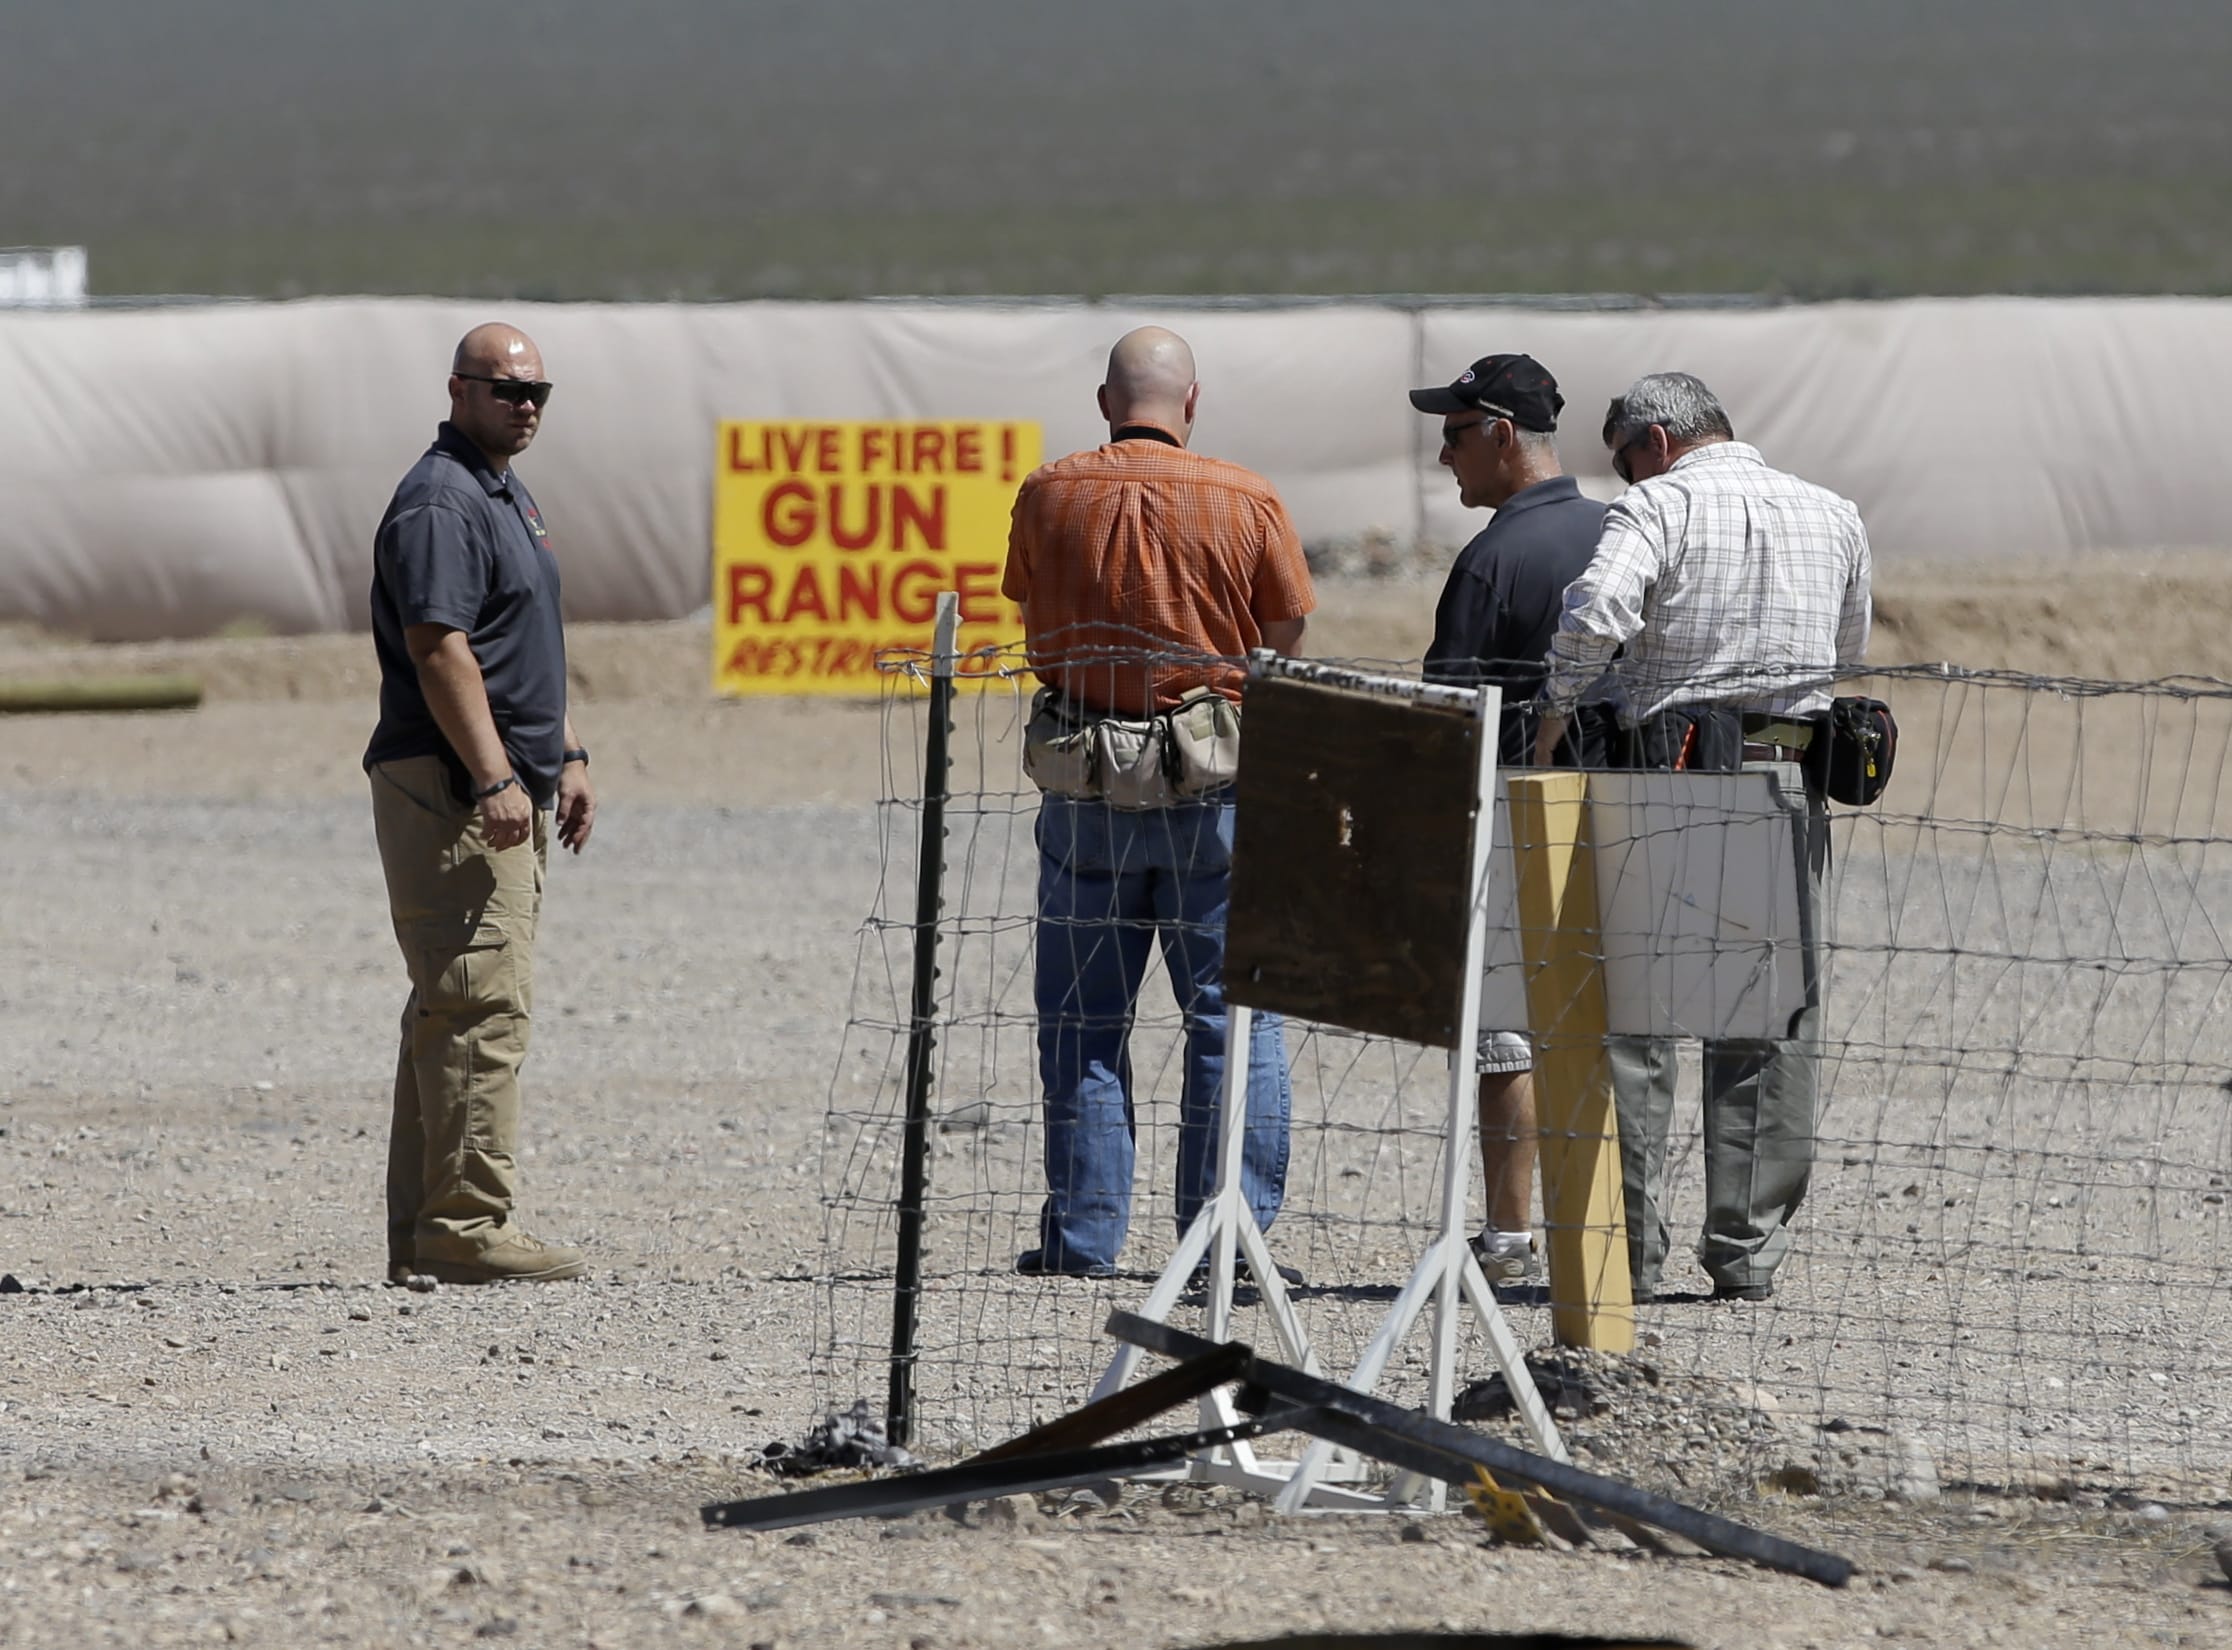 People are seen at the Last Stop outdoor shooting range Wednesday, Aug. 27, in White Hills, Ariz. Gun range instructor Charles Vacca was accidentally killed Monday, Aug. 25, at the range by a 9-year-old with an Uzi submachine gun.